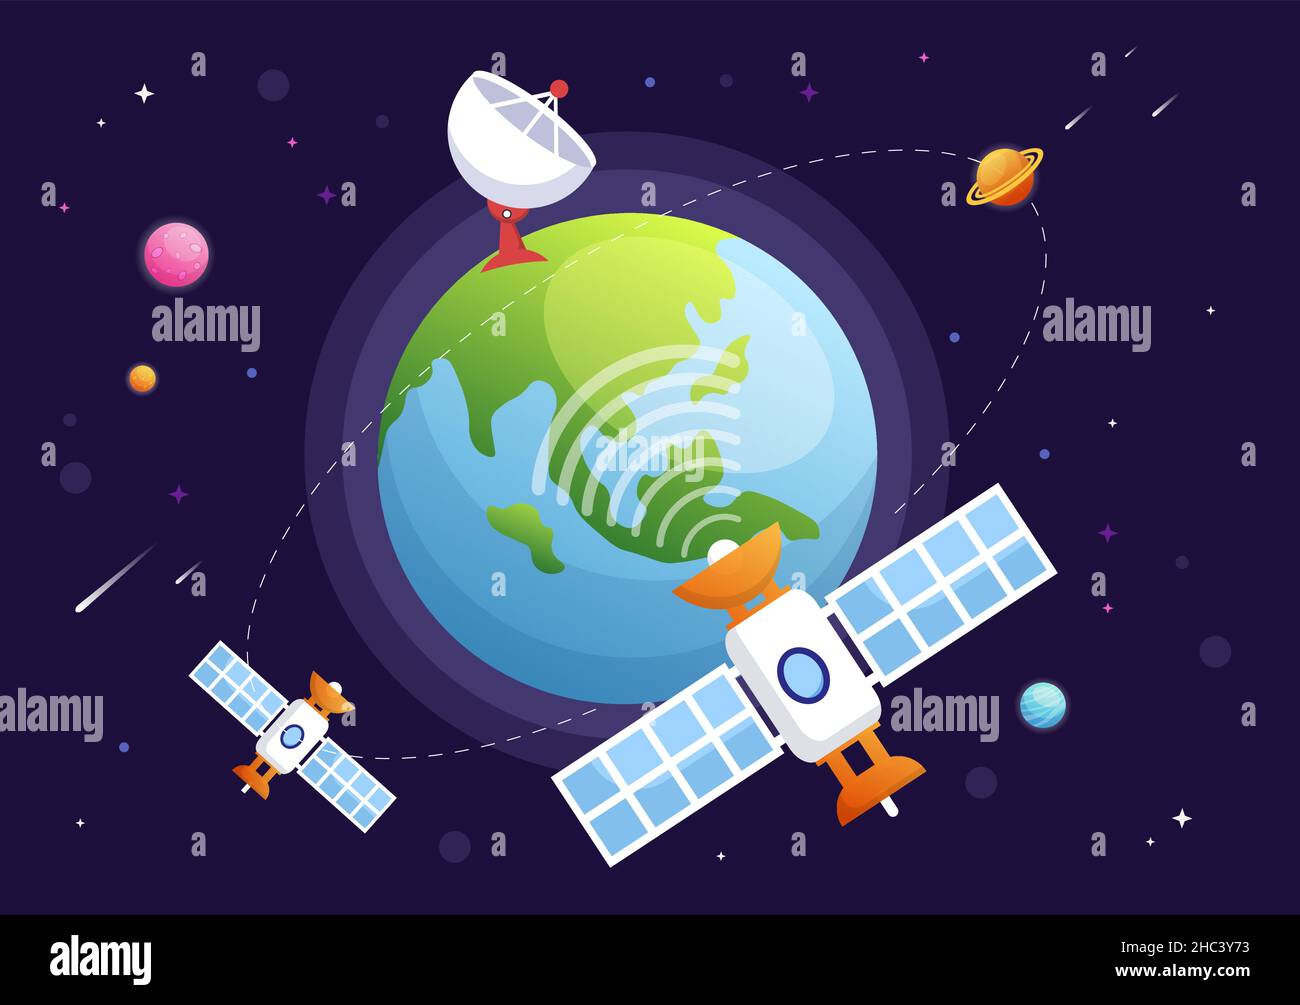 Artificial Satellites Orbiting the Planet Earth with Wireless Technology Global 5G Internet Network Satellite Communication in Background Illustration Stock Vector